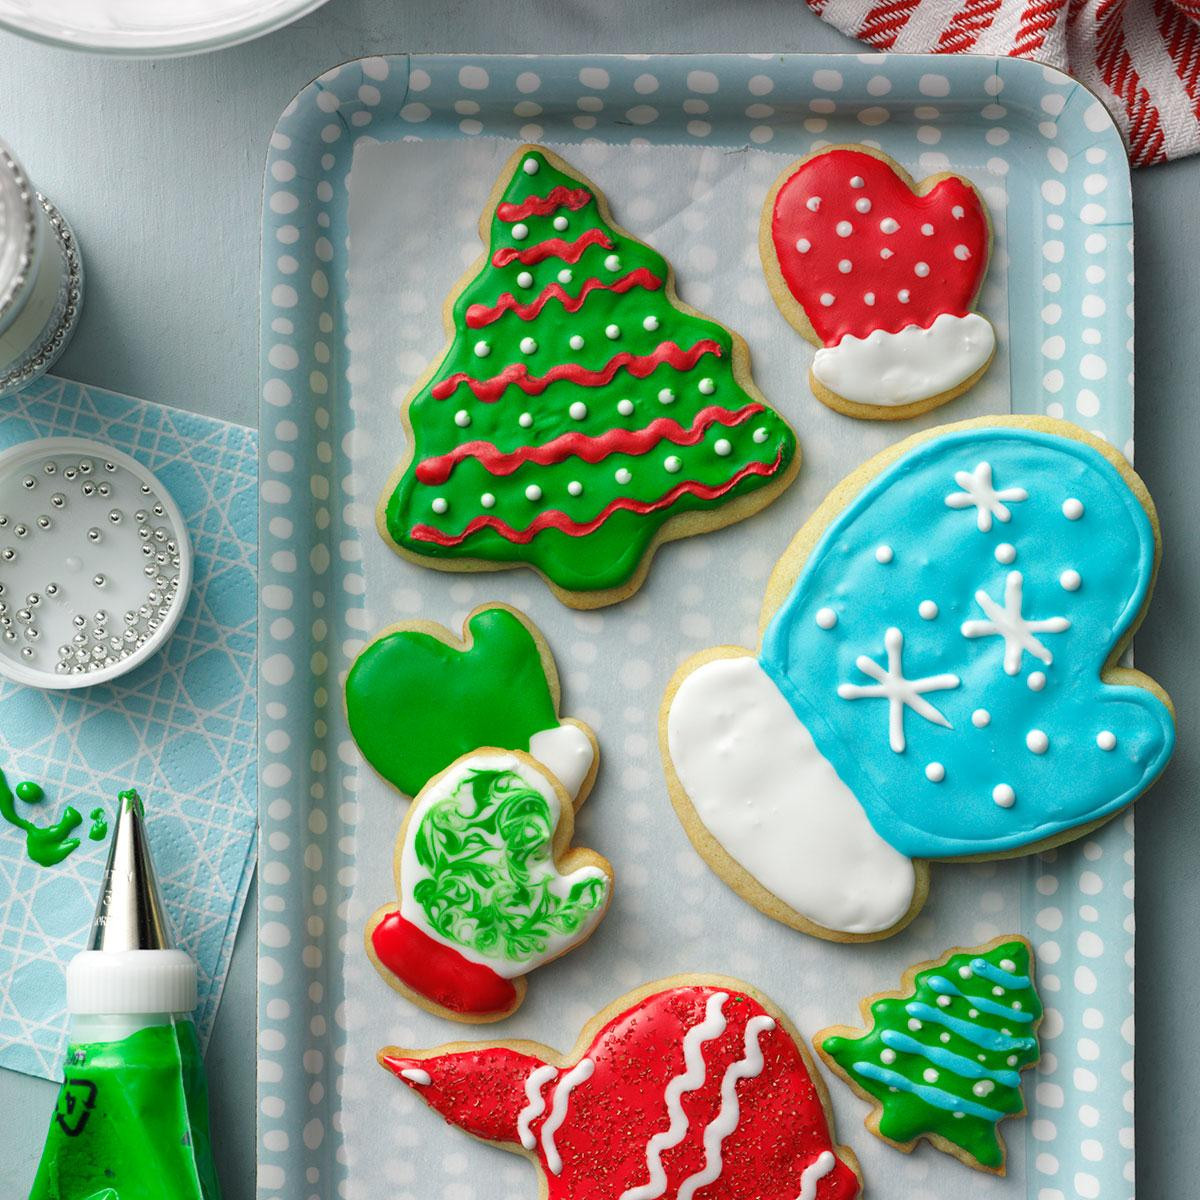 Christmas Cookies Image
 Holiday Cutout Cookies Recipe